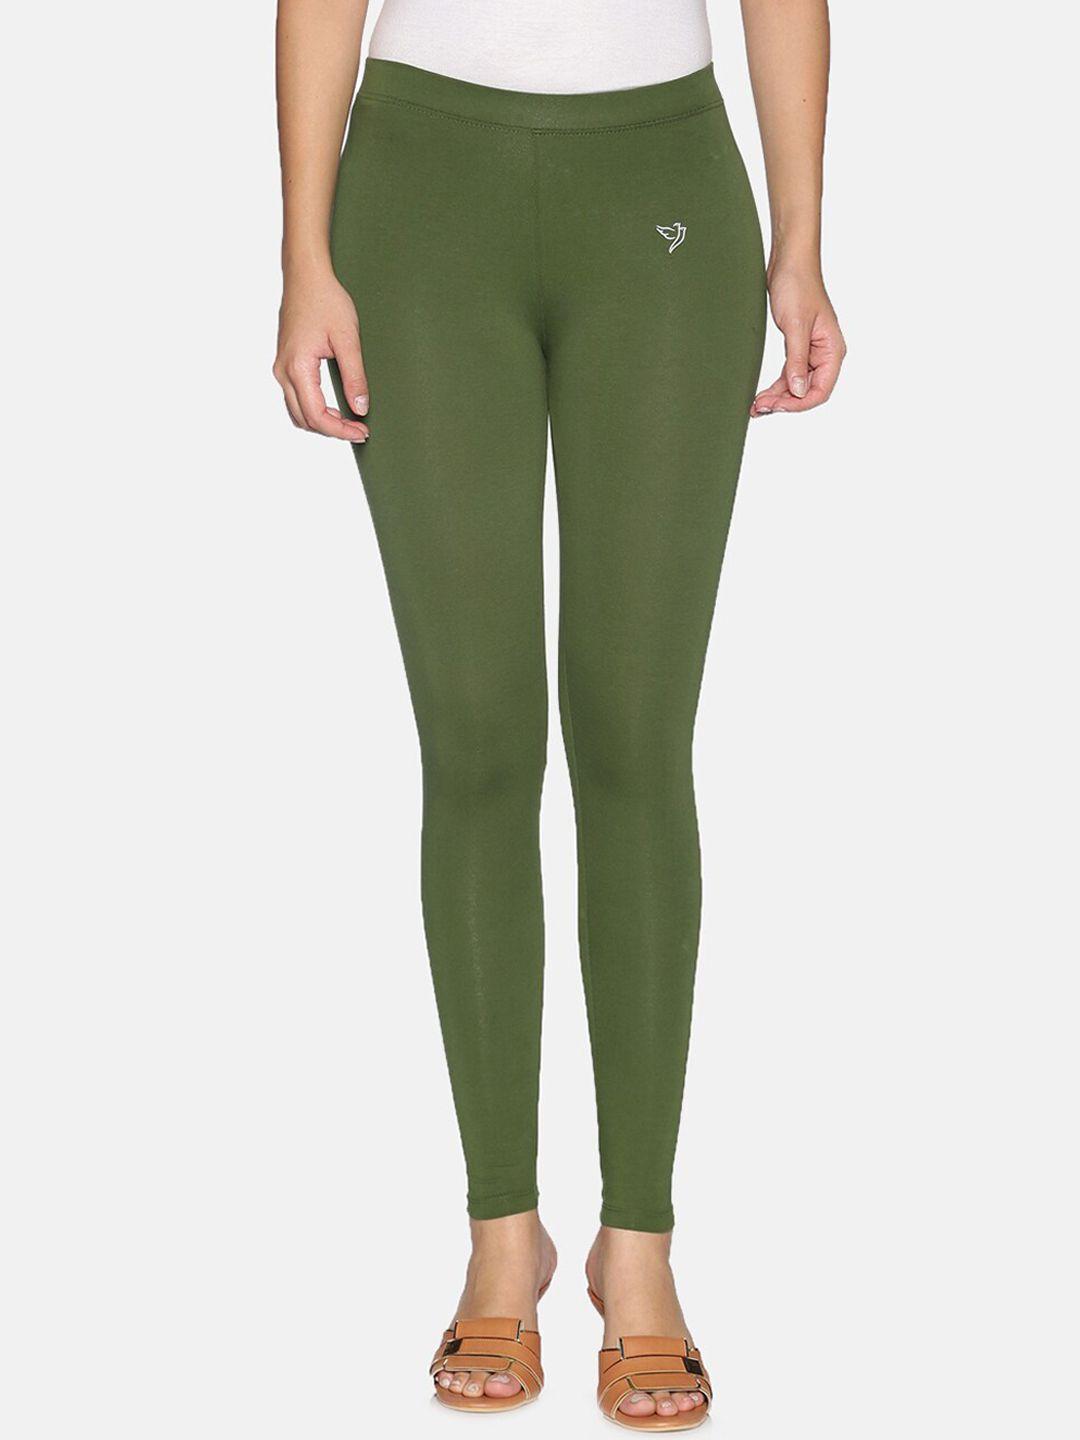 twin-birds-tailored-fit-ankle-length-leggings